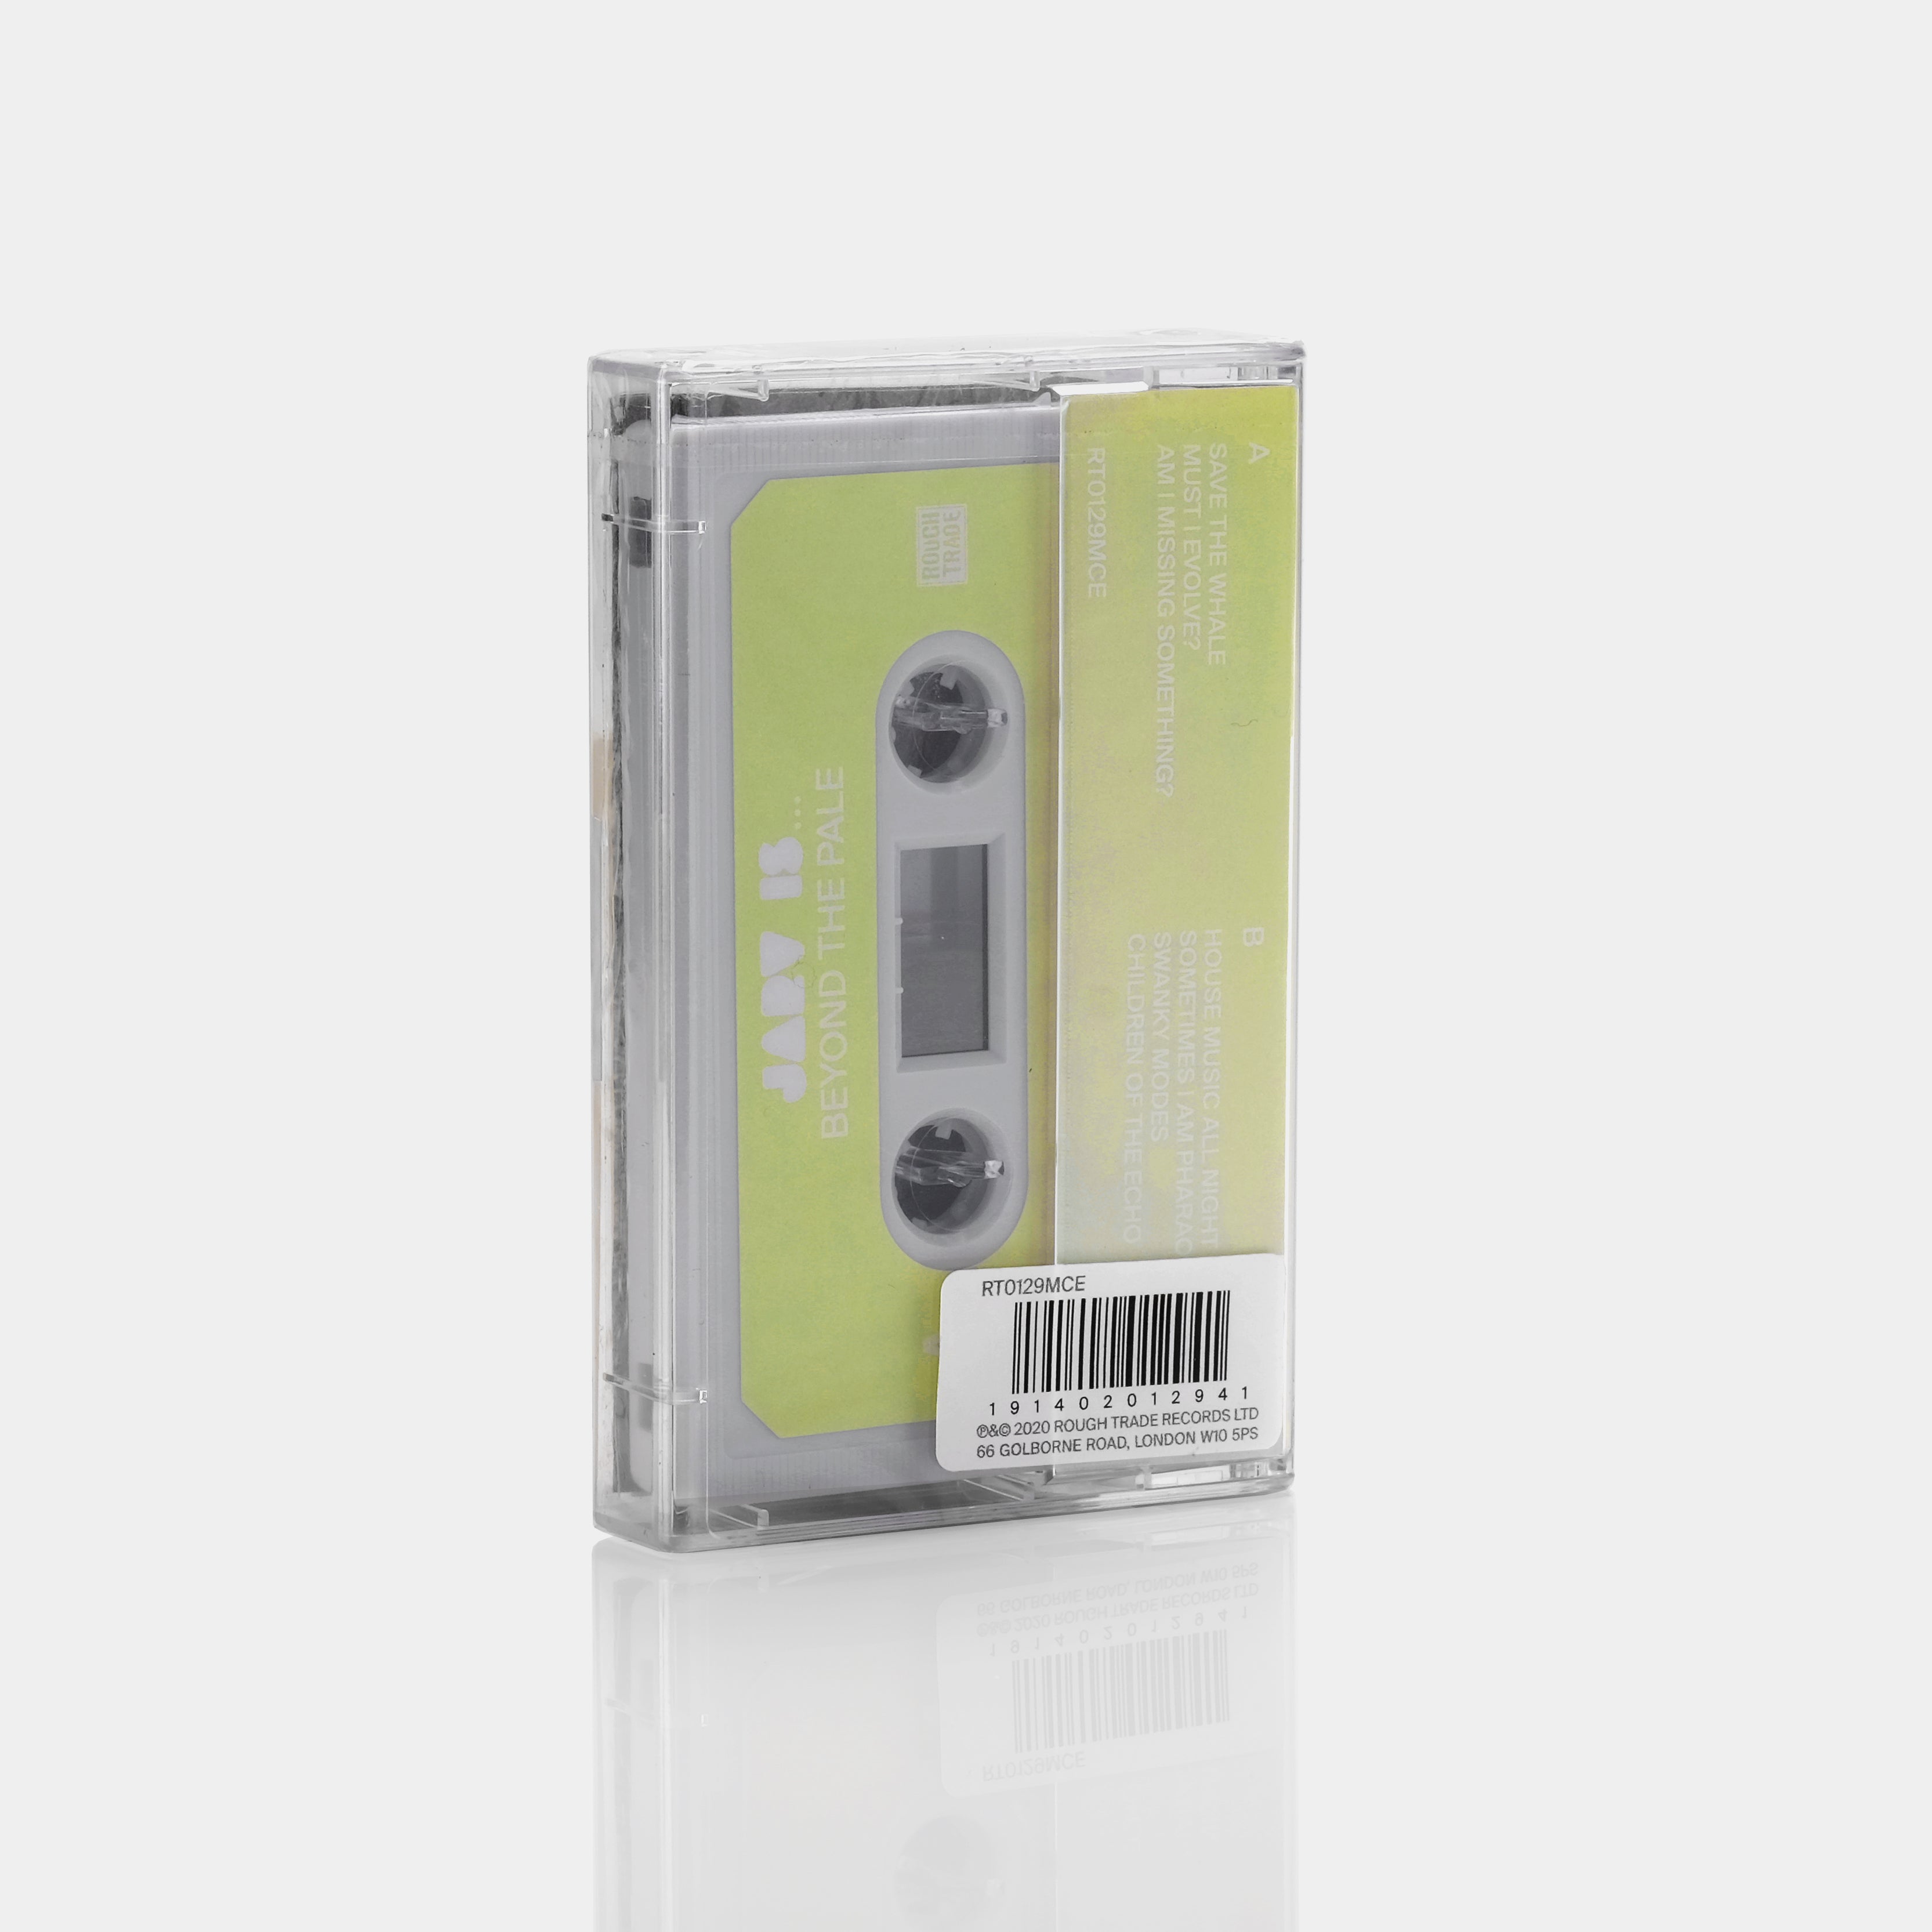 JARV IS... - Beyond The Pale Cassette Tape